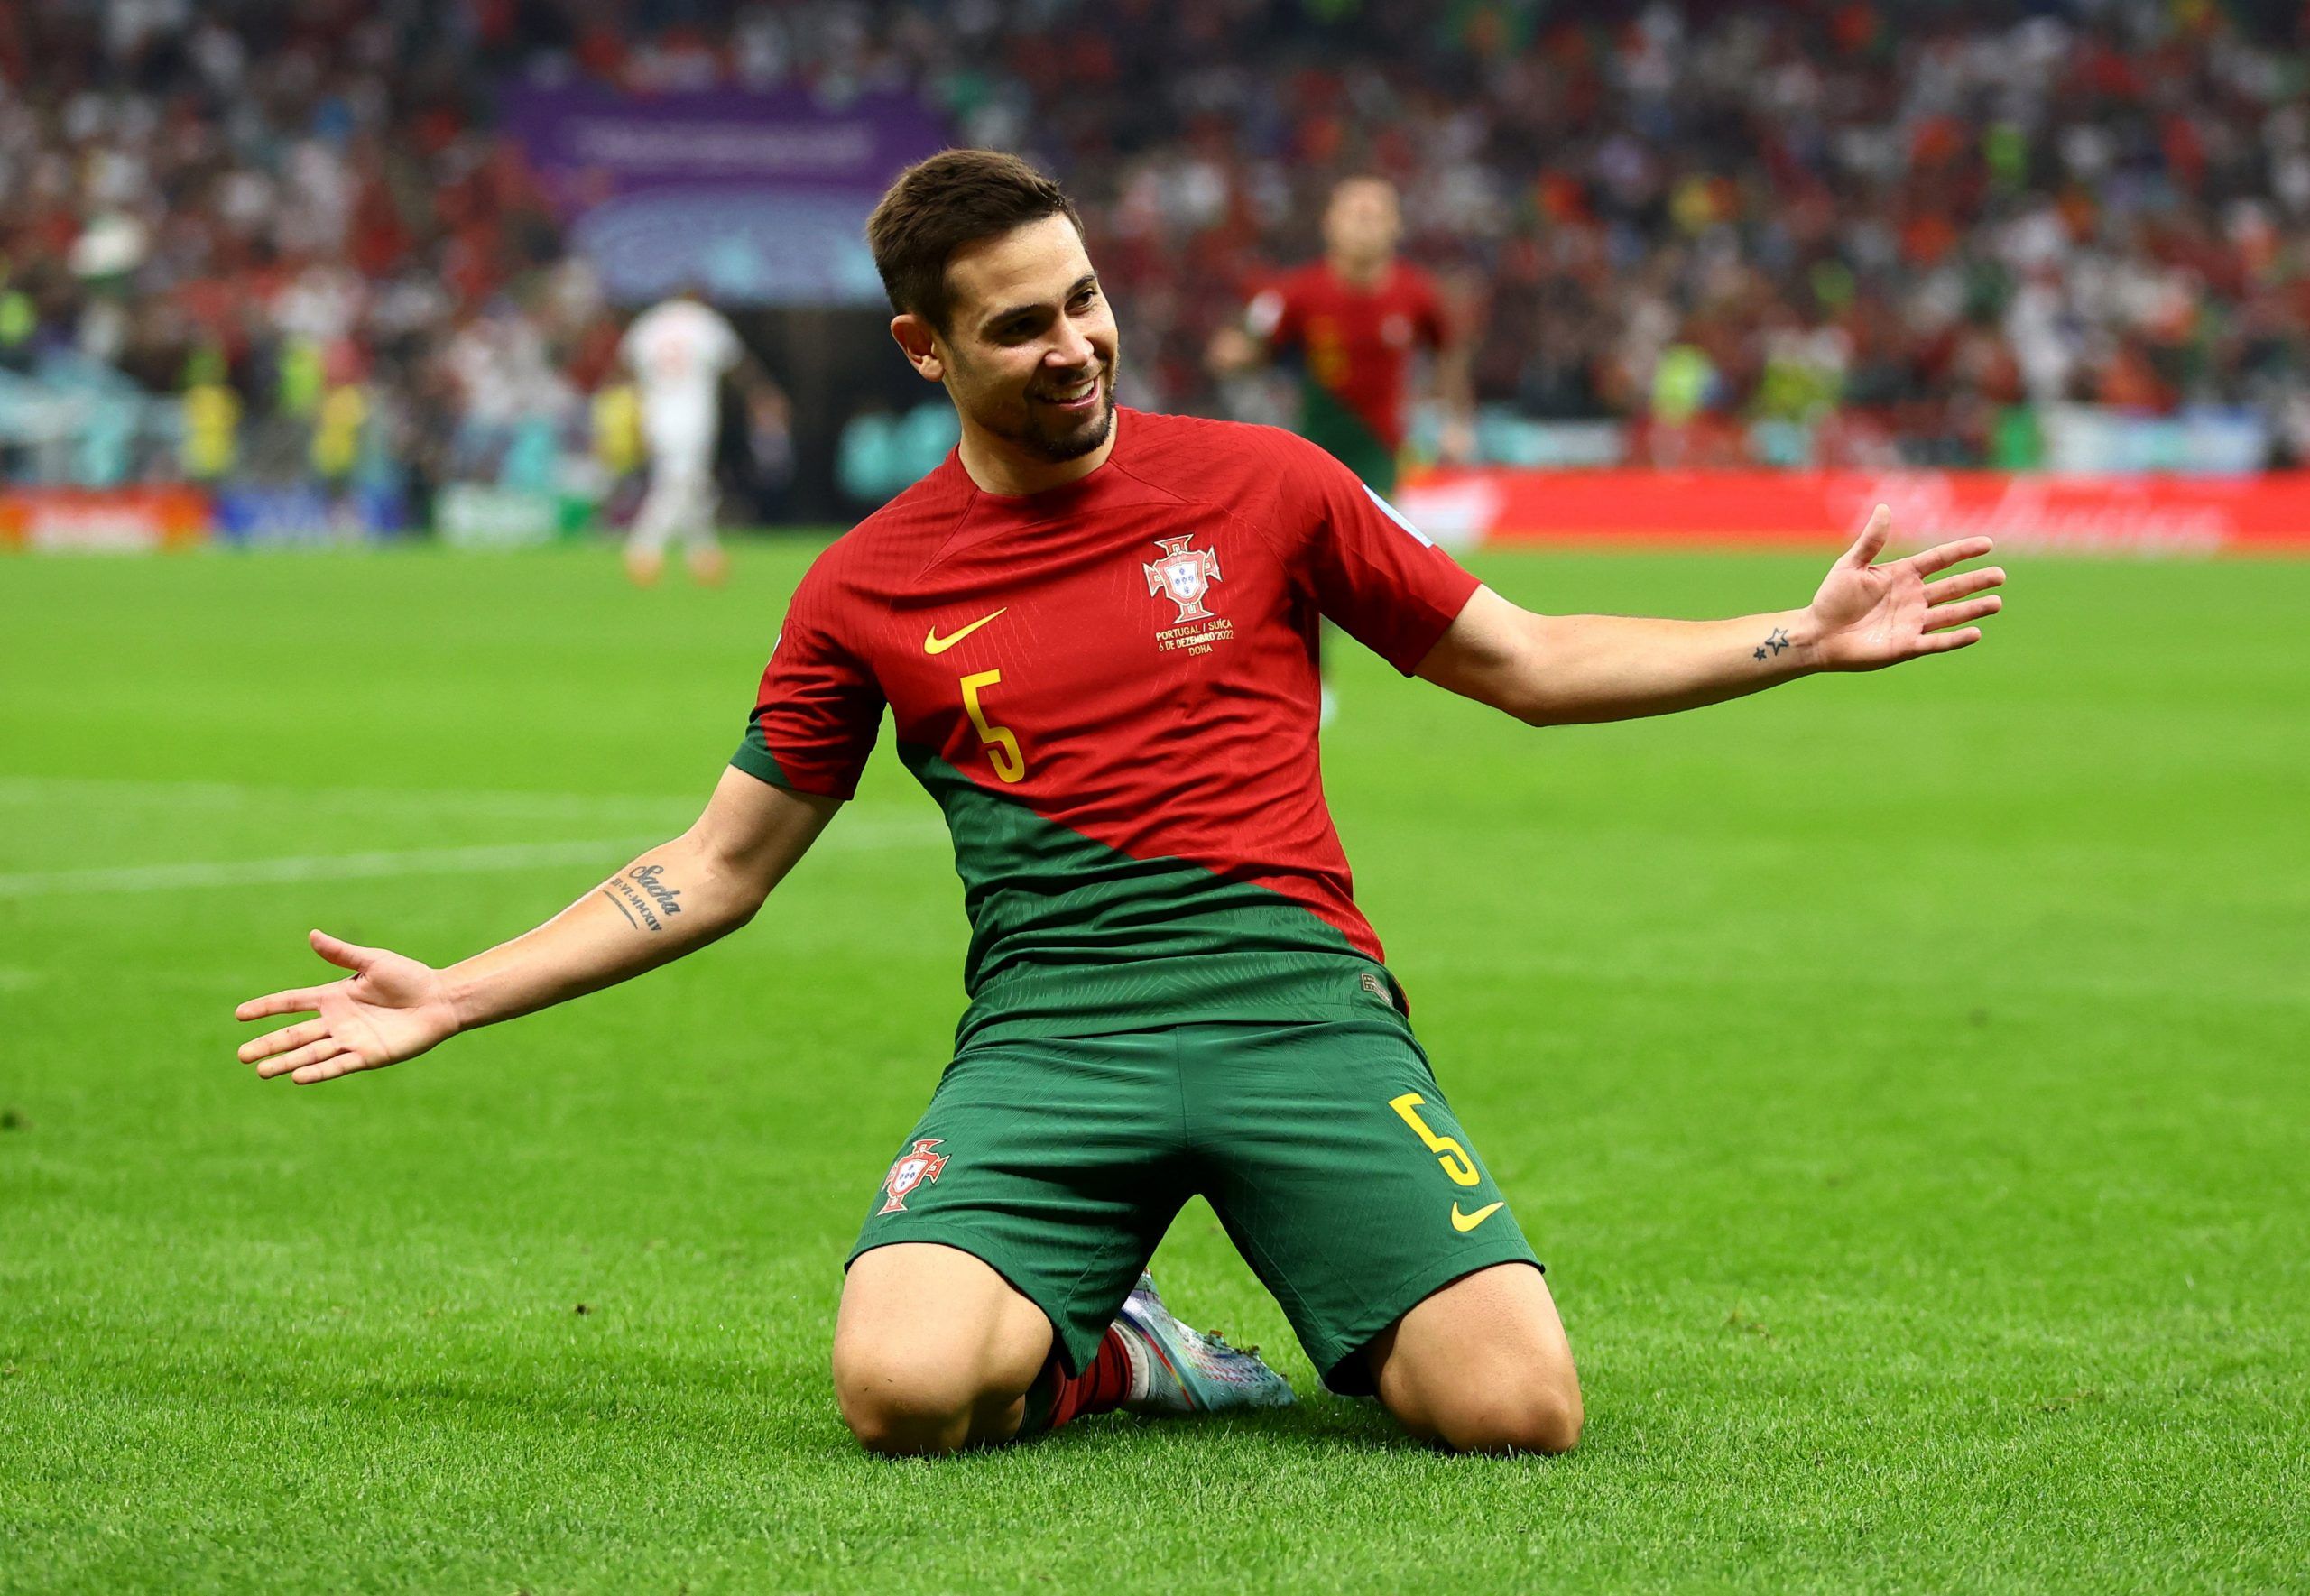 Portugal's Raphael Guerreiro celebrates scoring their fourth goal vs Switzerland in last-16 of the World Cup